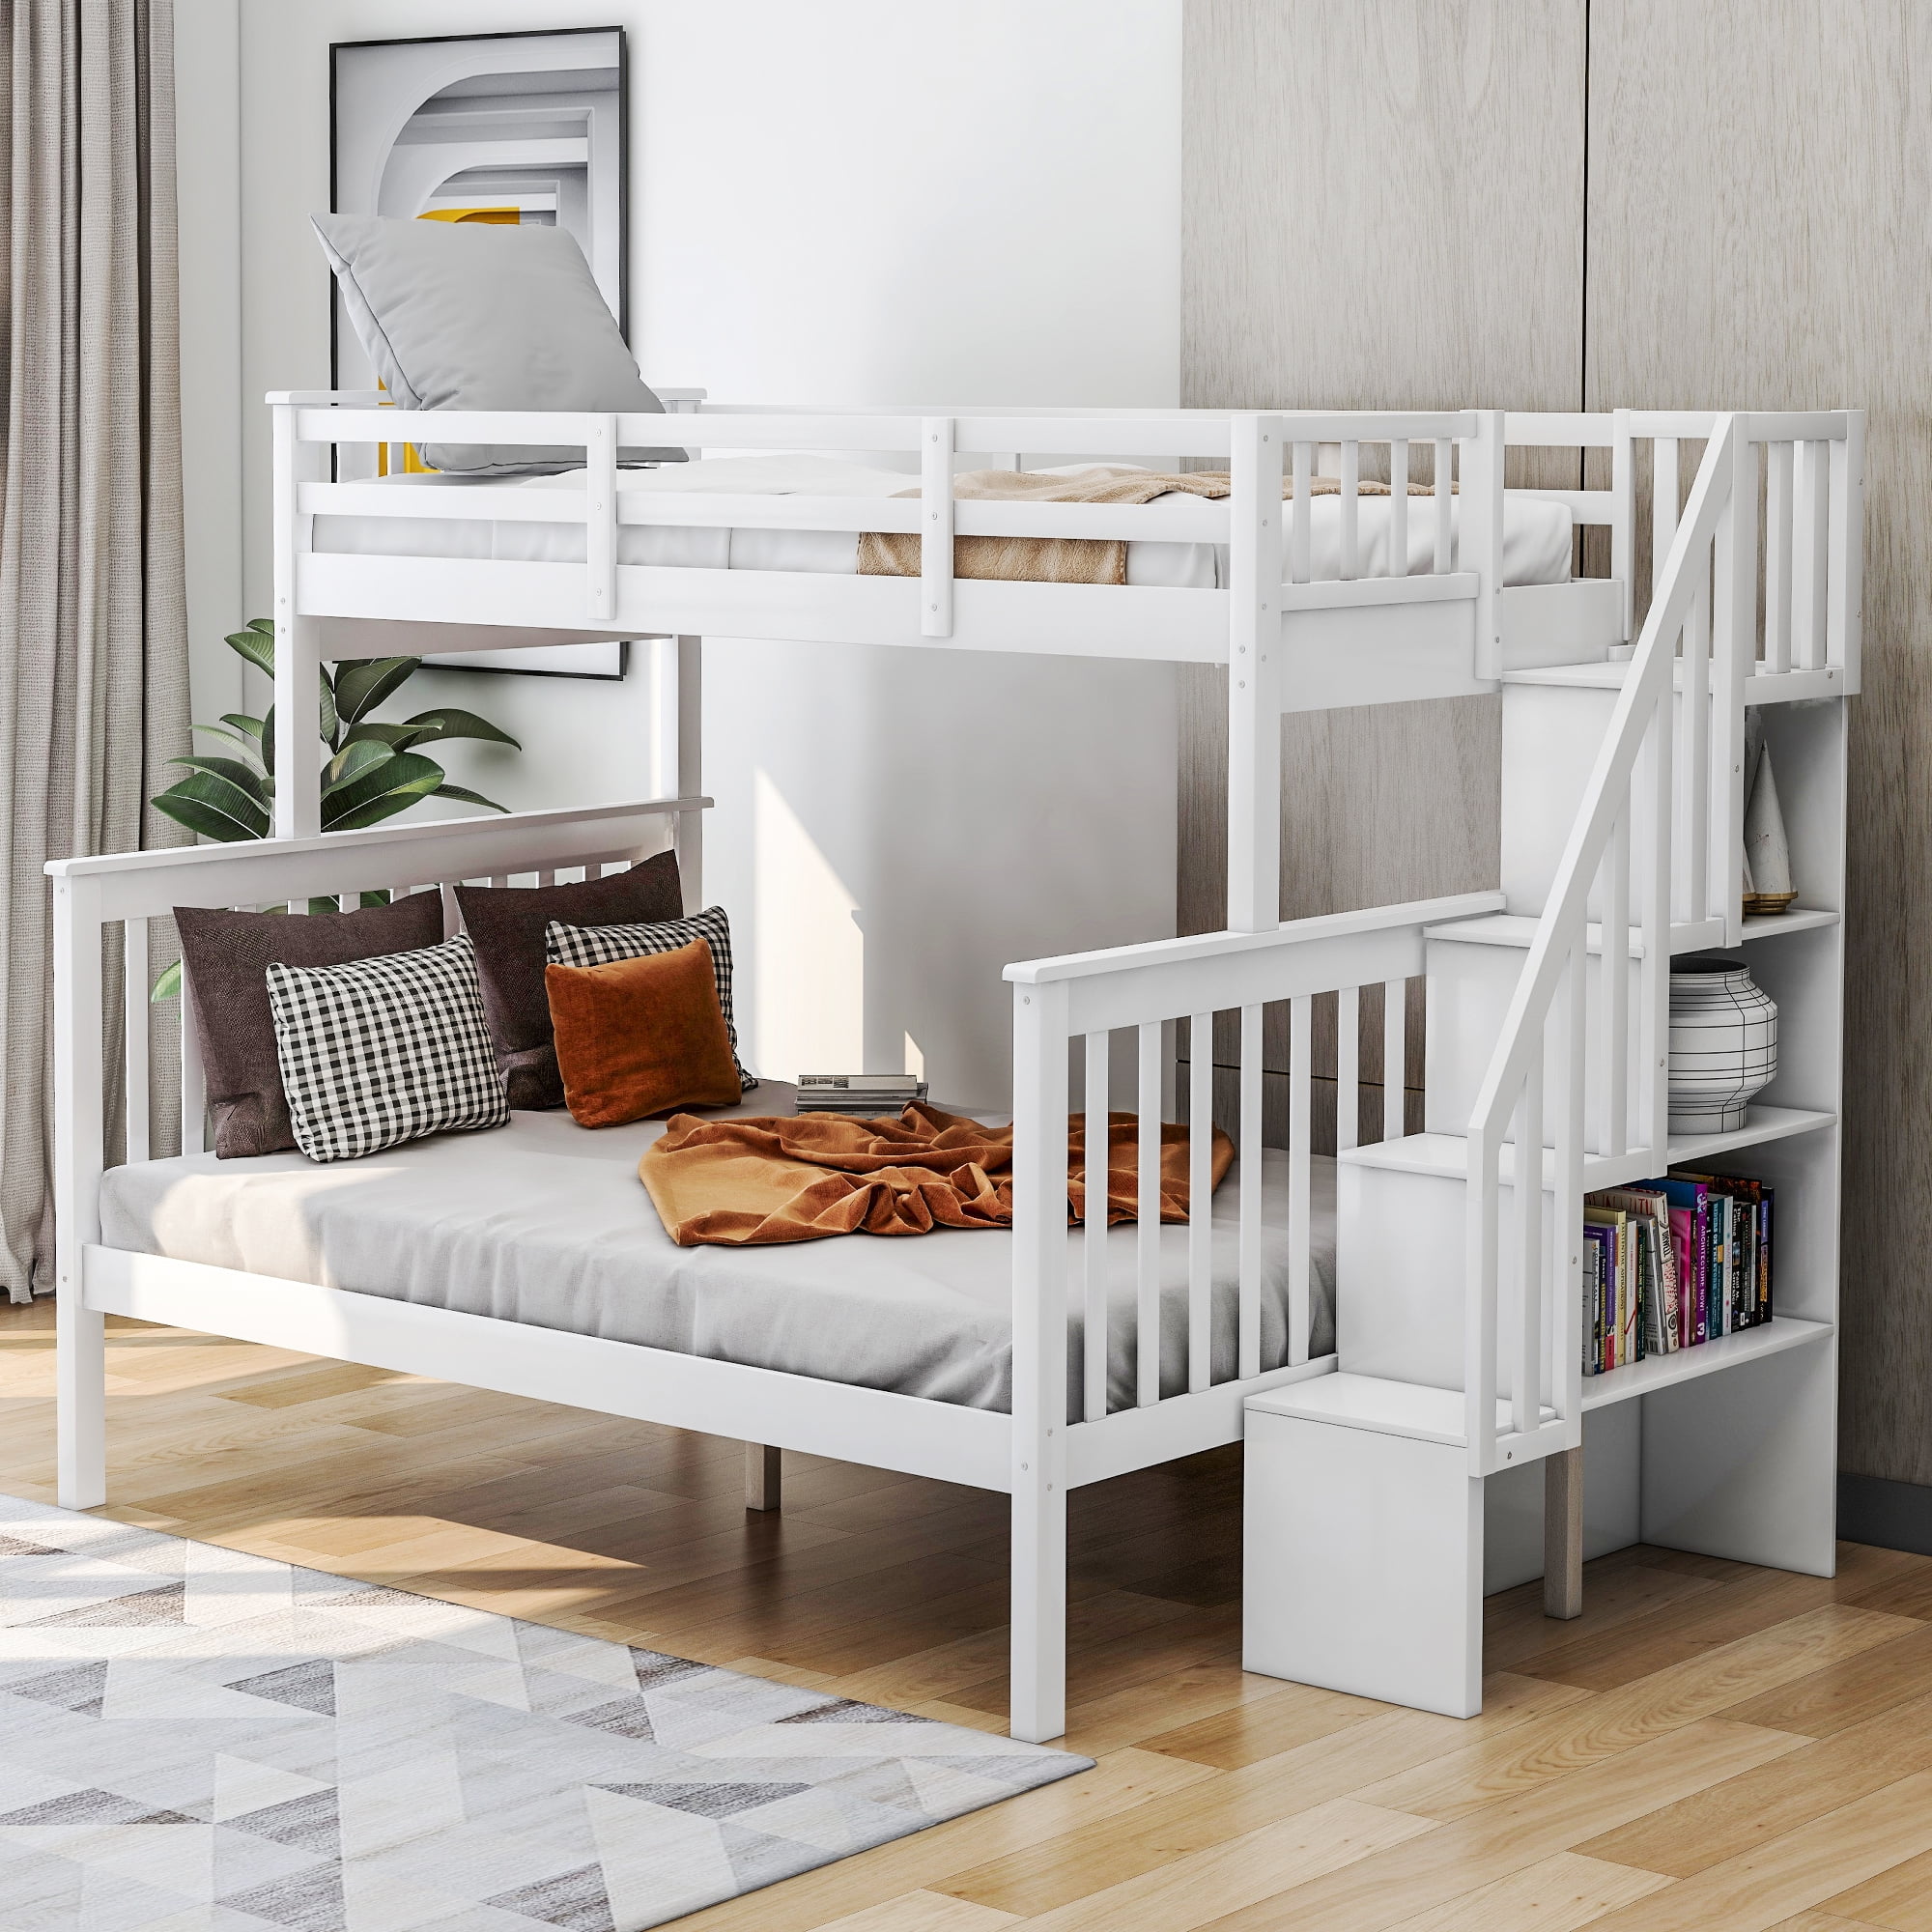 Twin Over Full Bunk Bed Frame Hardwood, Hardwood Bunk Beds With Stairs